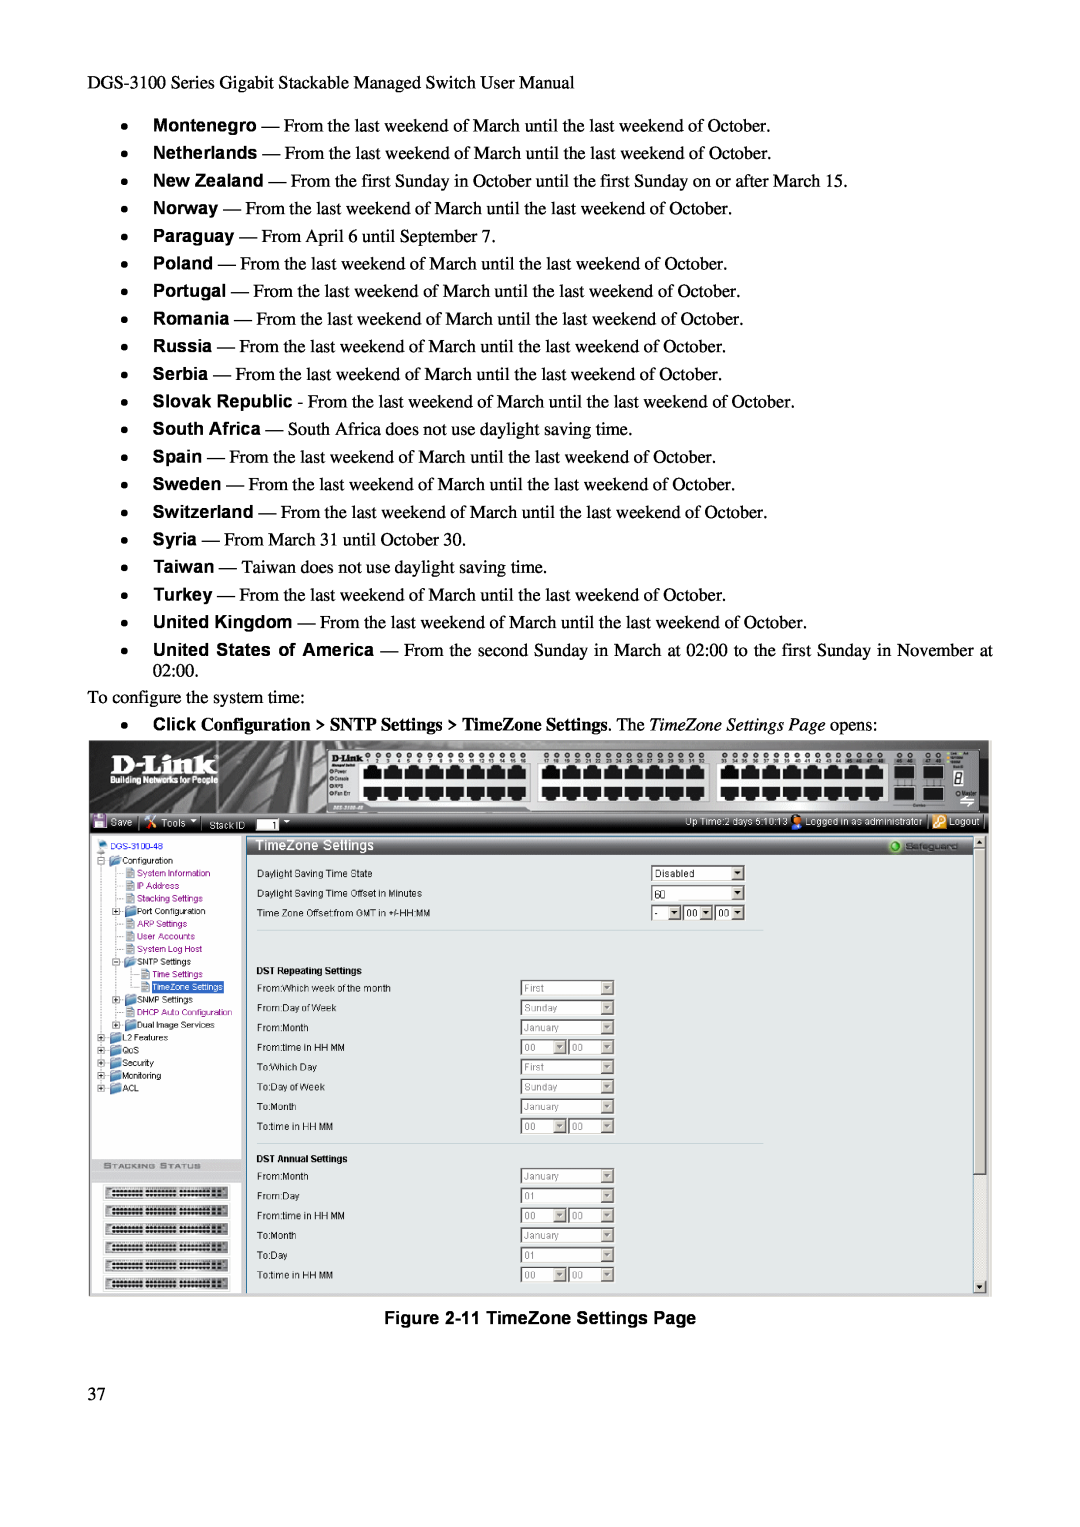 D-Link DGS-3100 user manual 11 TimeZone Settings Page 